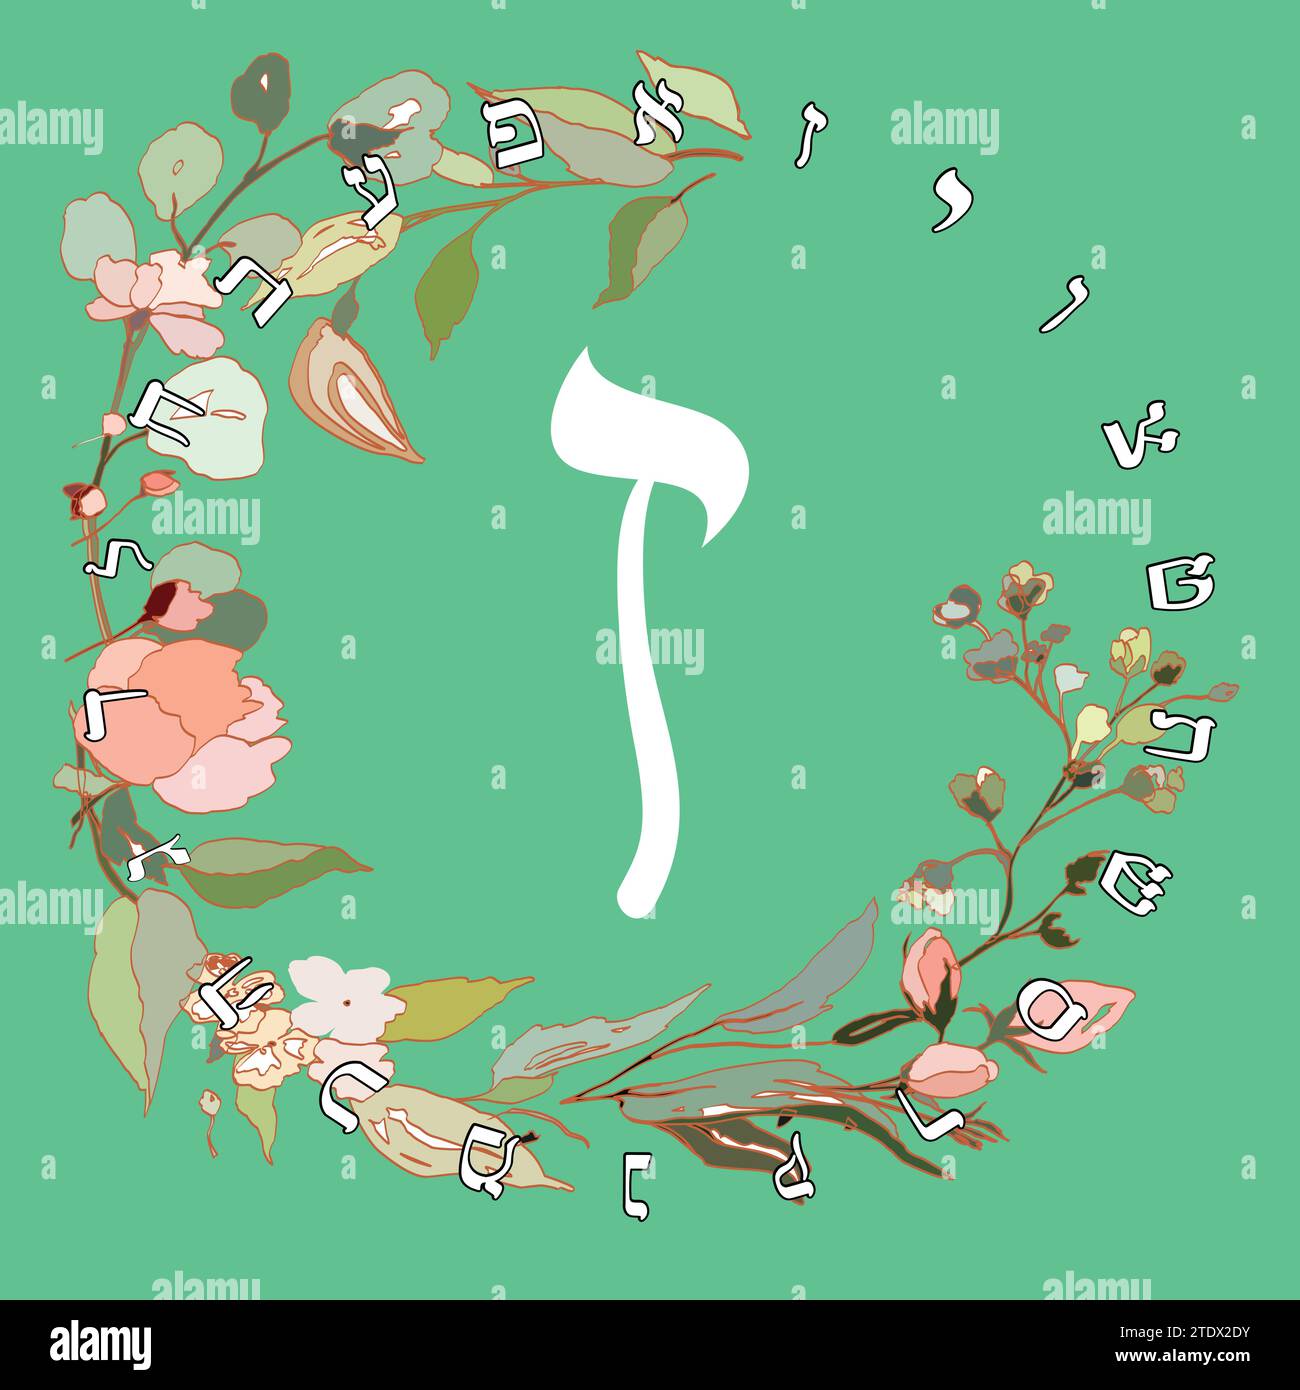 Vector illustration of the Hebrew alphabet with floral design. Hebrew letter called Zayin white on green background. Stock Vector